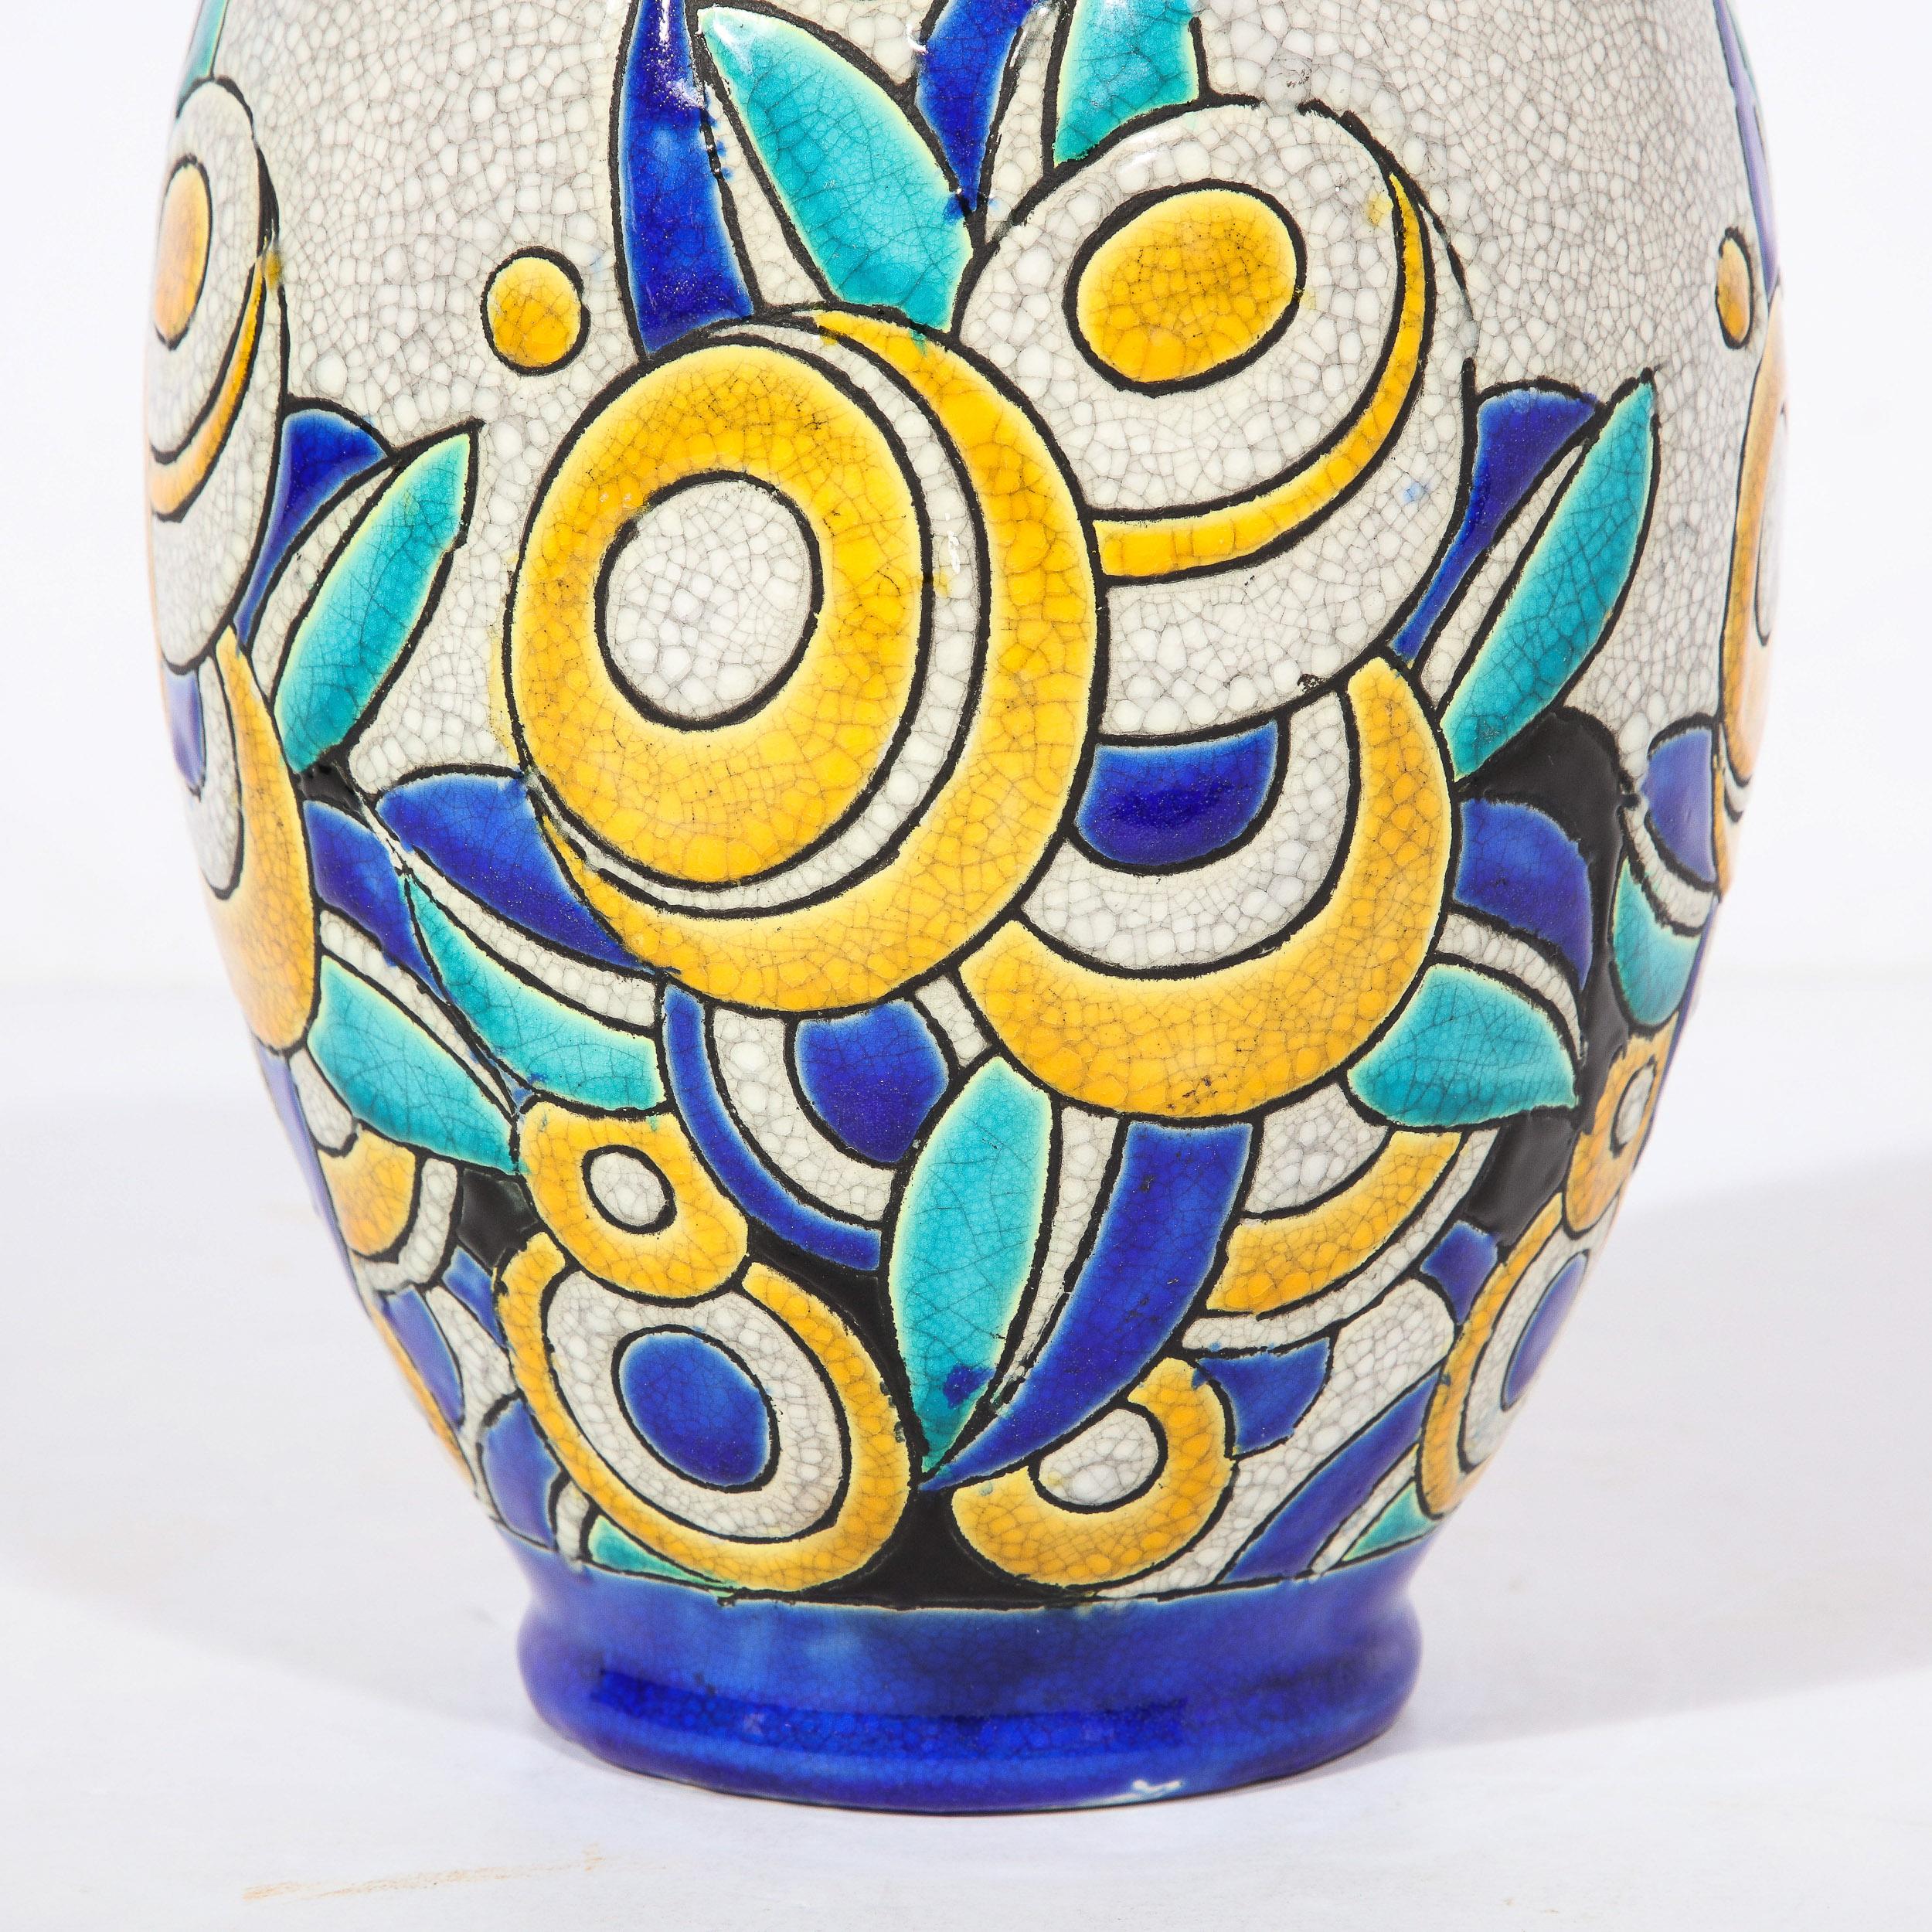 Art Deco Cubic Floral Ceramic Vase by Charles Catteau for Boch Freres Keramis For Sale 4